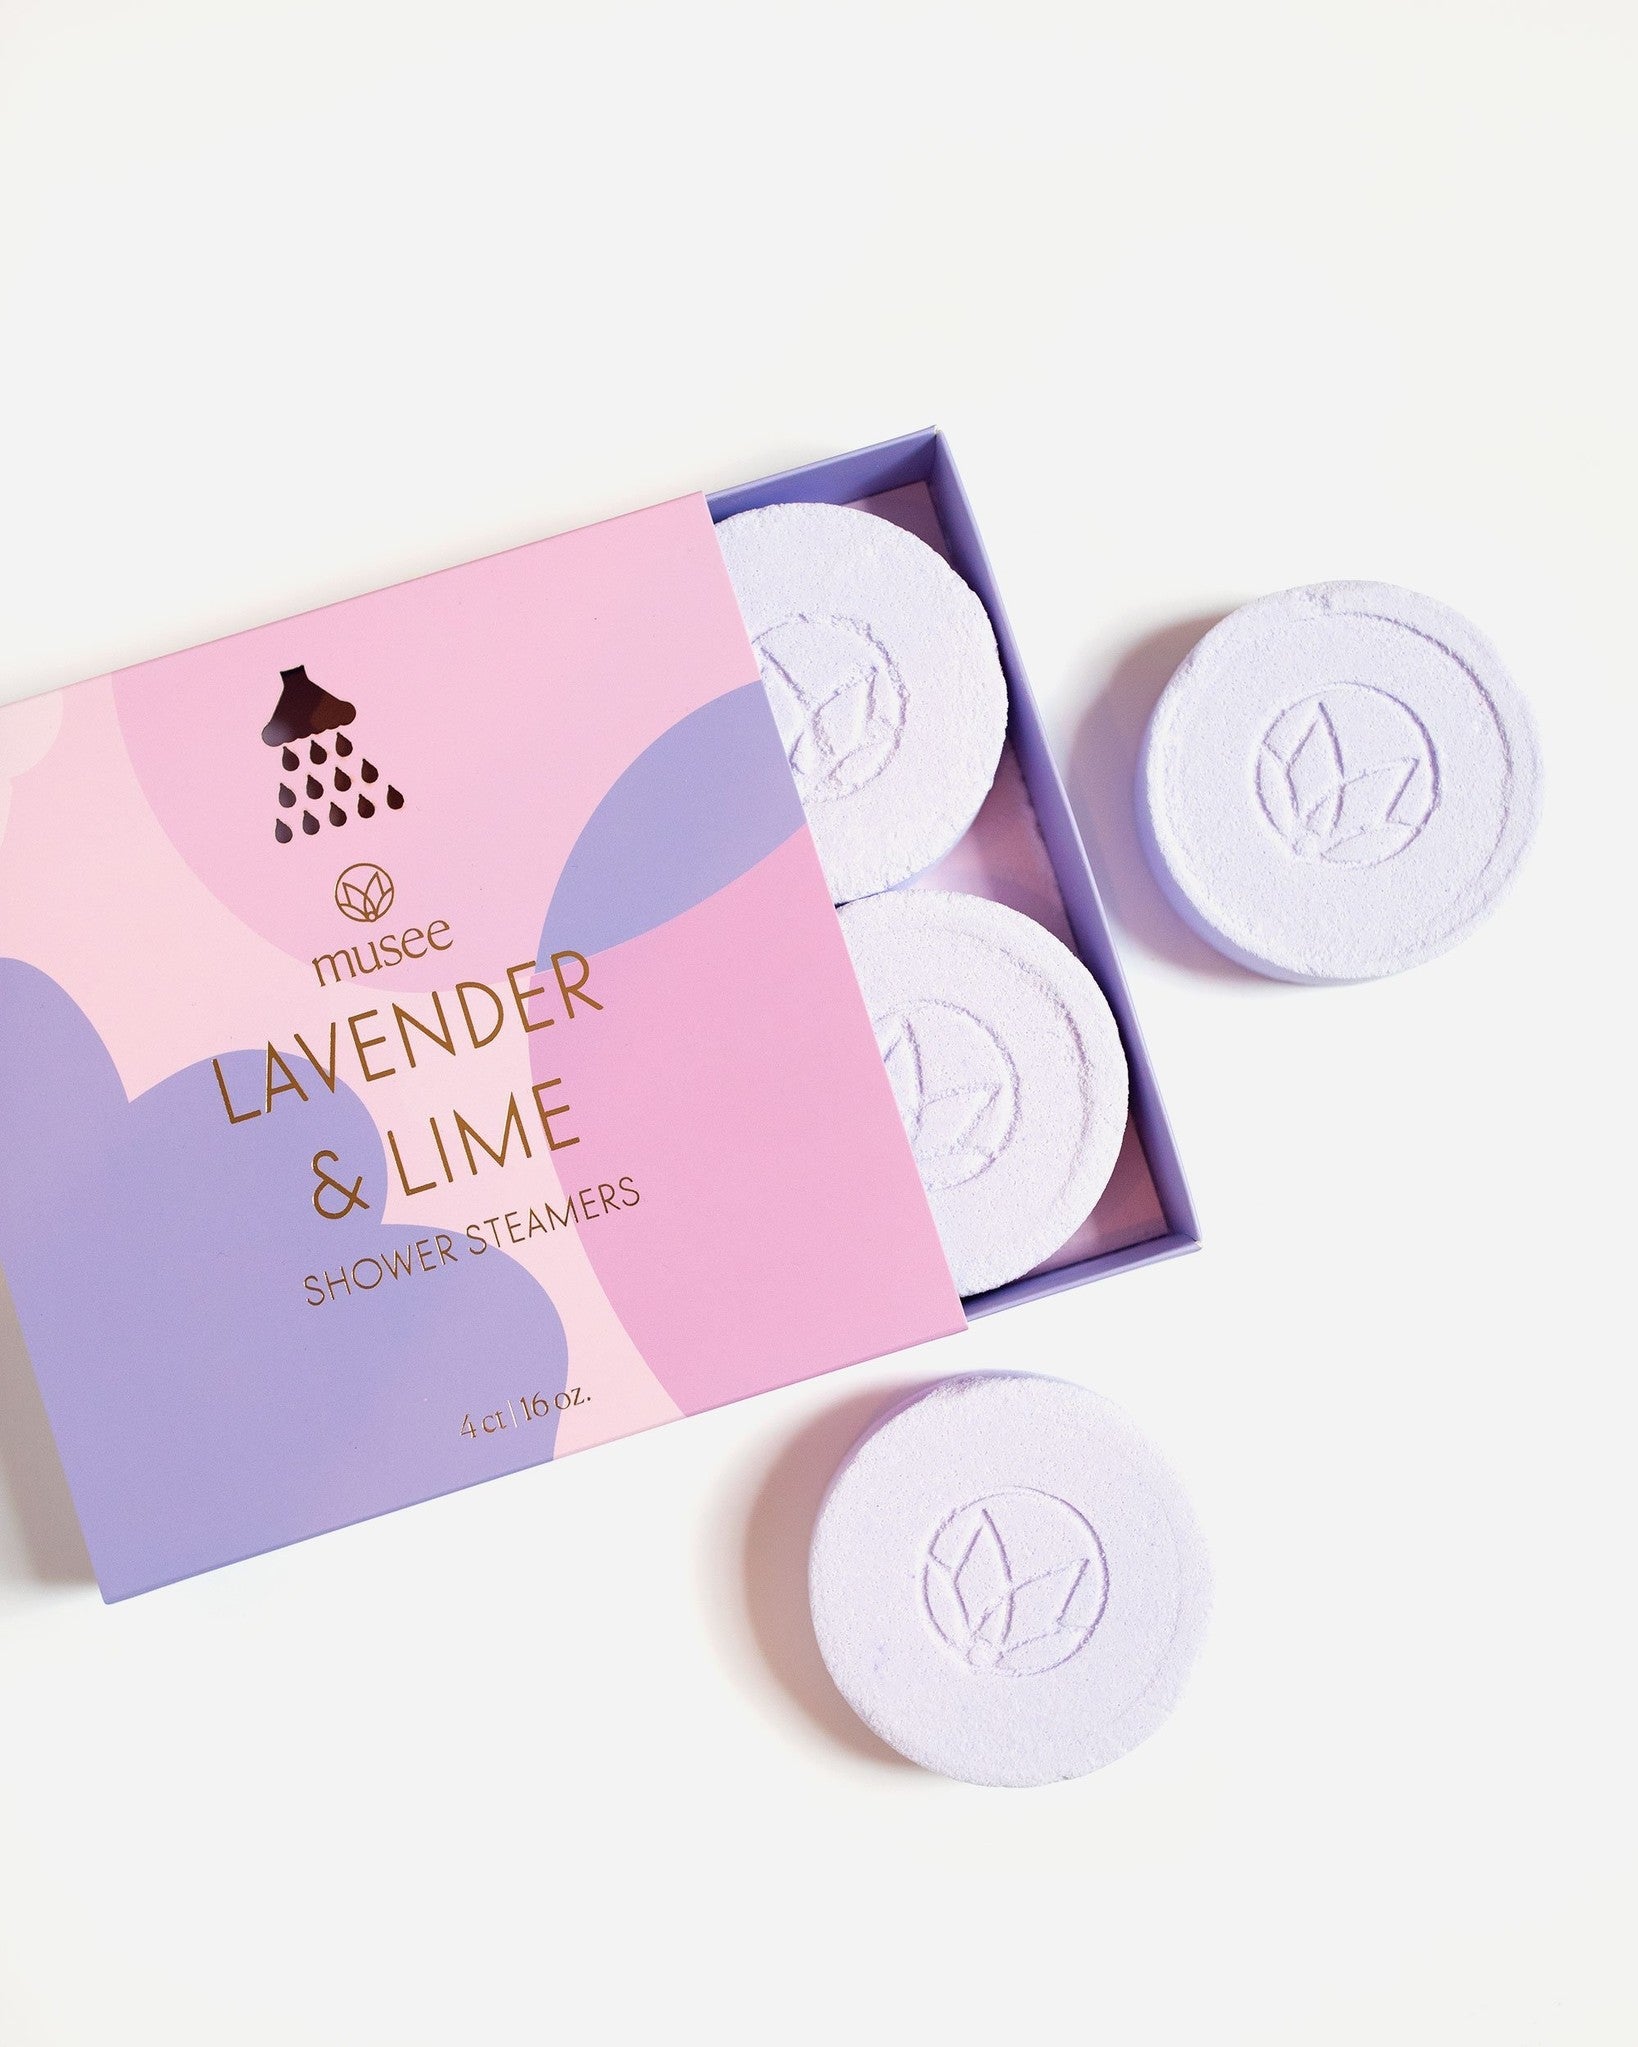 Lavender and Lime Shower Steamers